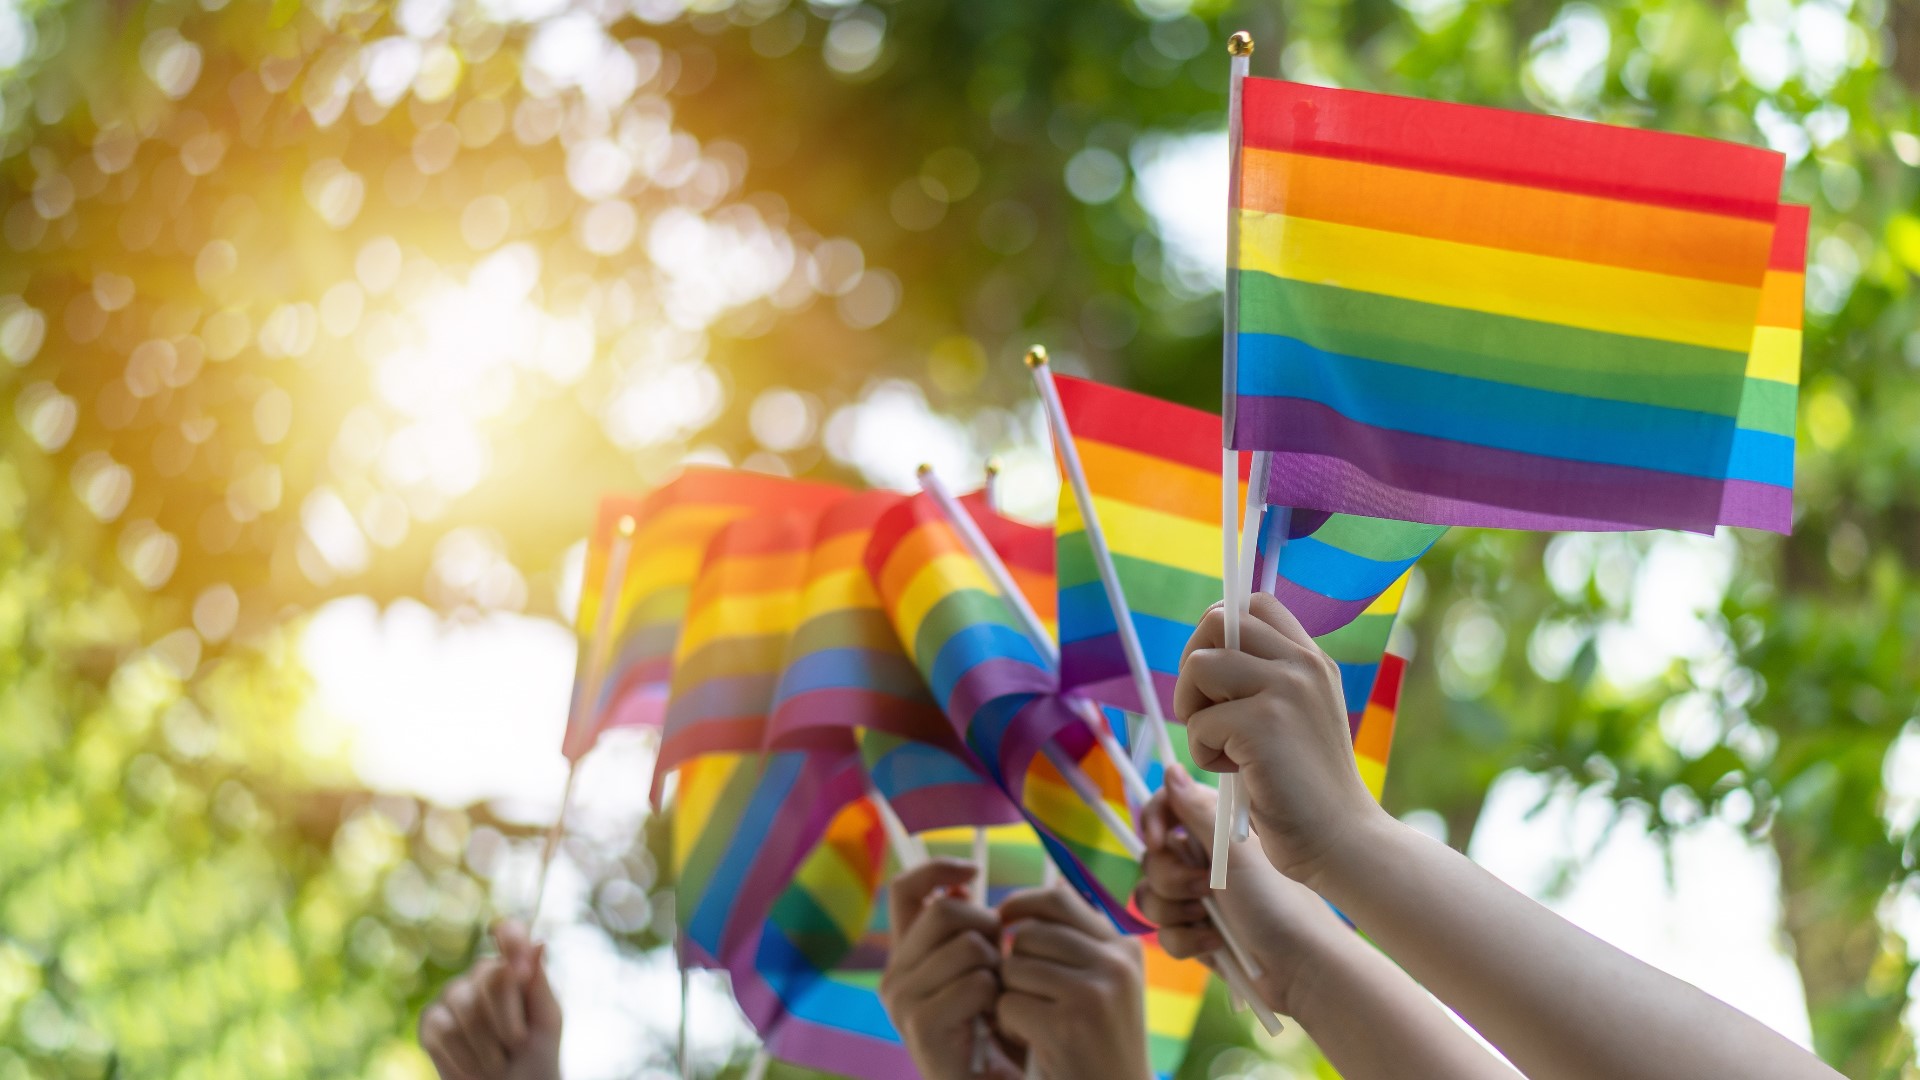 HB 162 prohibits all licensed mental health providers from engaging in any practices that try to change a minor's sexual orientation or gender identity.